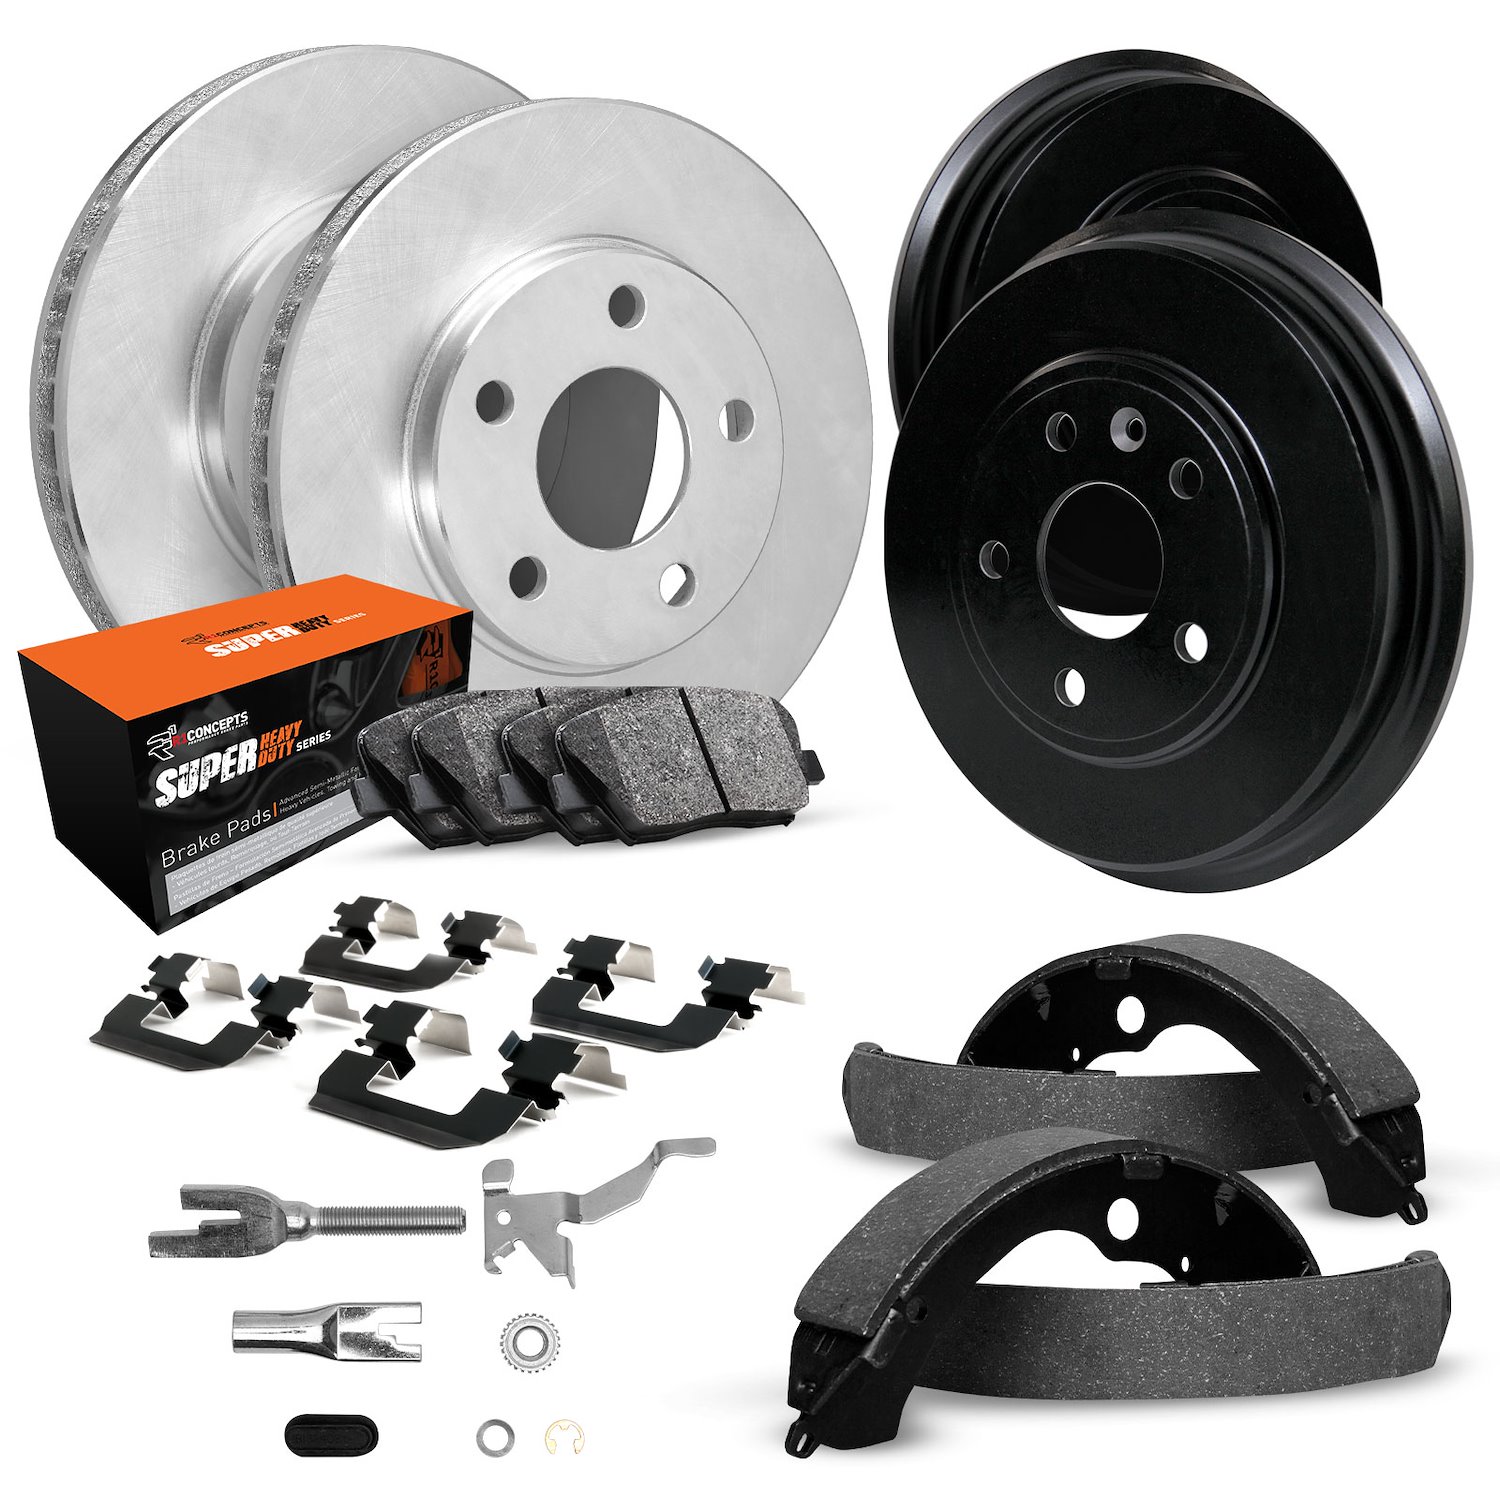 E-Line Blank Brake Rotor & Drum Set w/Super-Duty Pads, Shoes, Hardware, & Adjusters, 1991-1992 GM, Position: Front & Rear